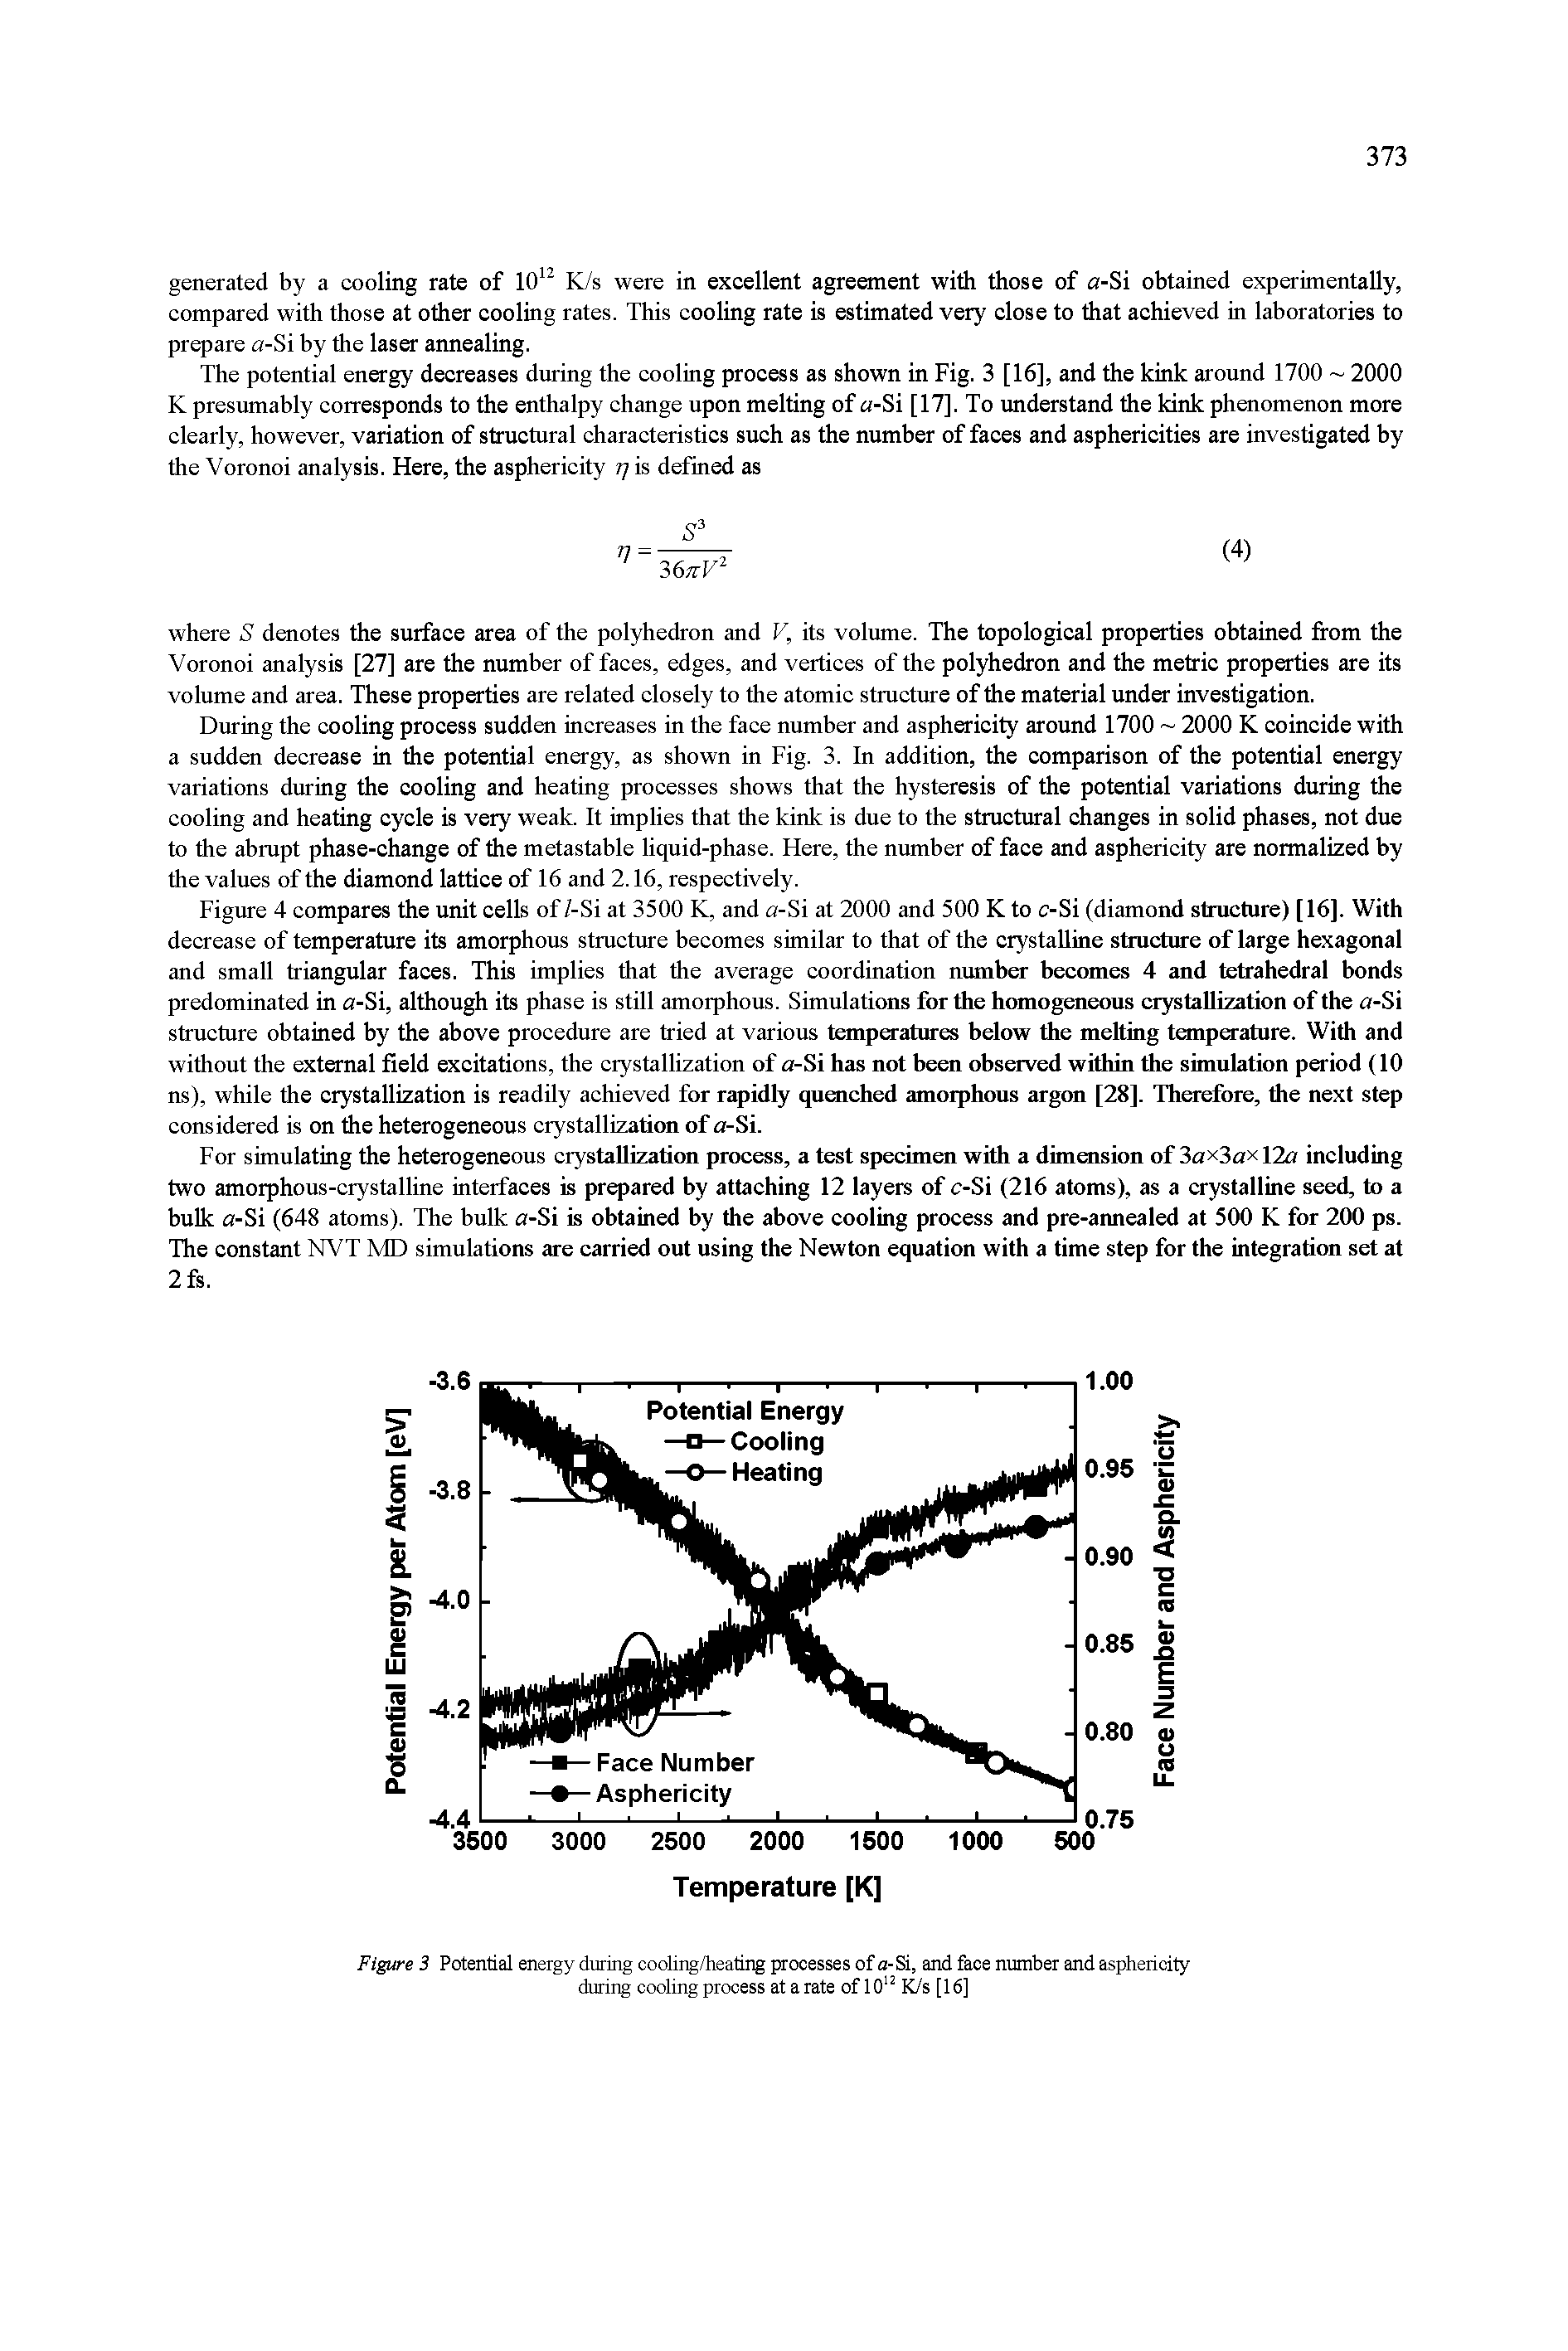 Figure 3 Potential energy during cooling/heating processes of a-Si, and face number and asphericity during cooling process at a rate of 10 K/s [16]...